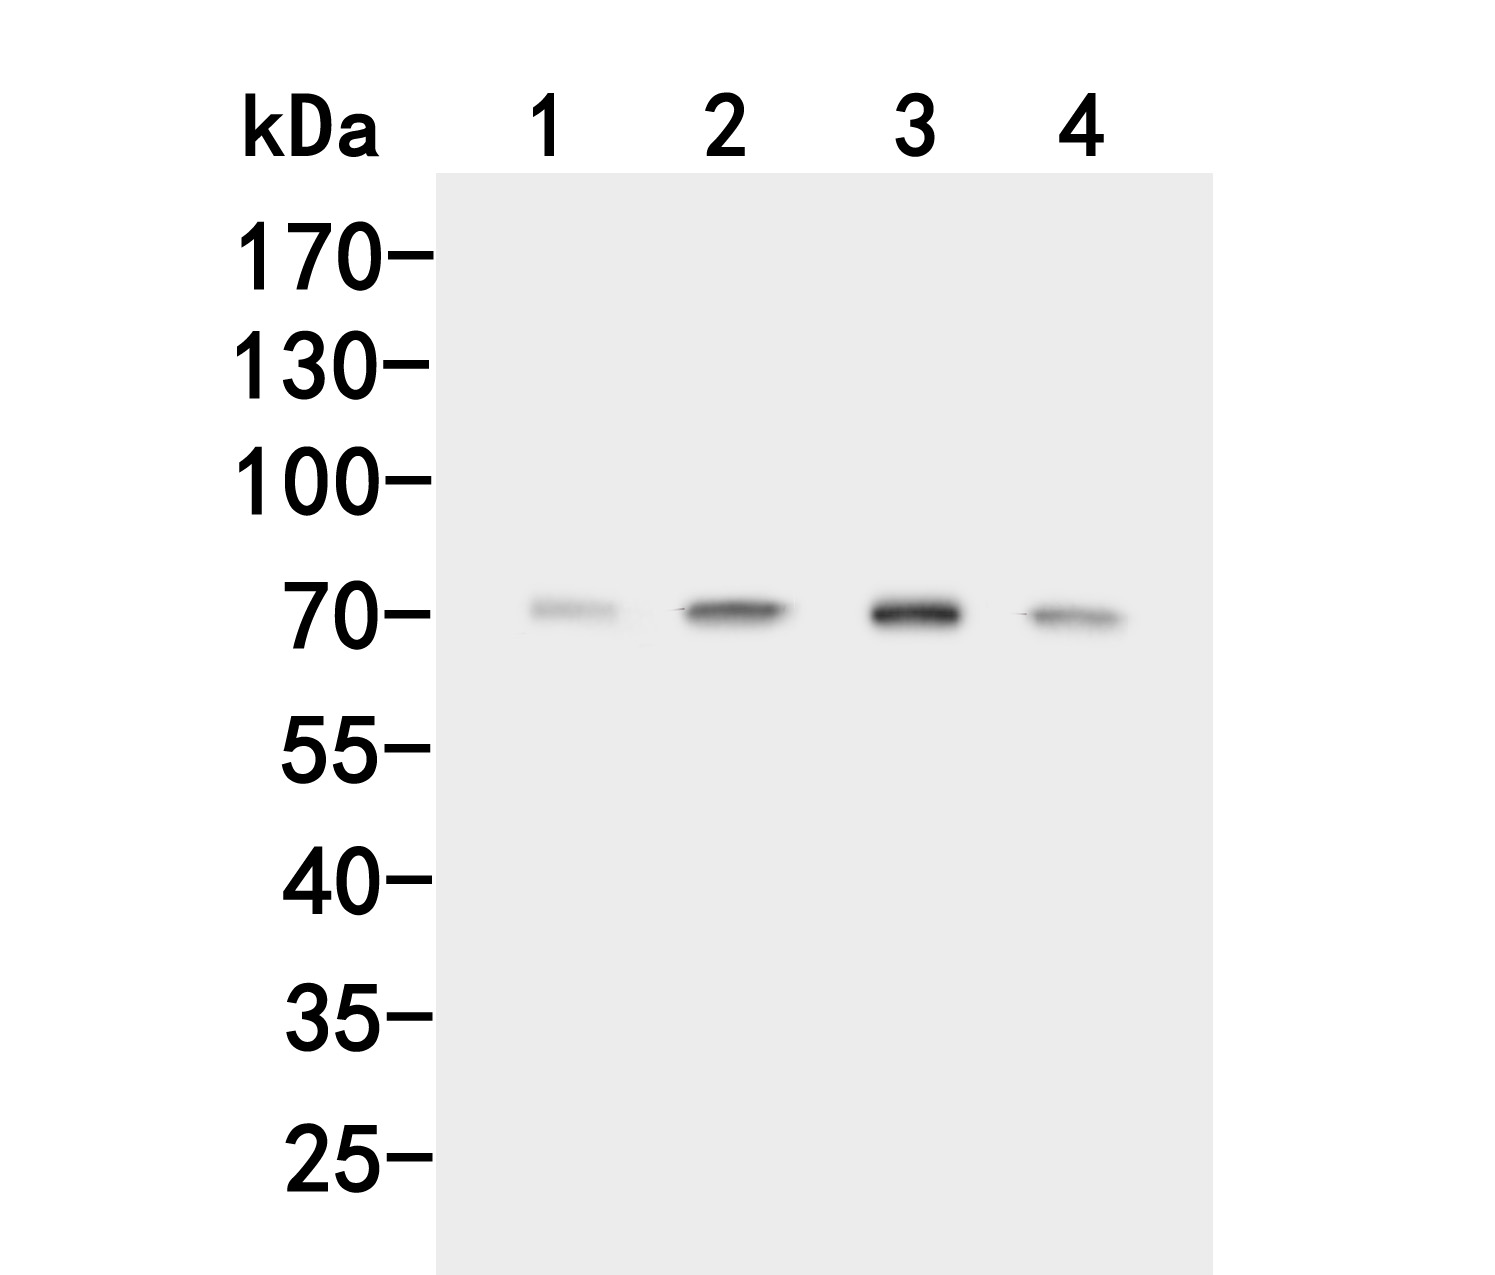 Western blot analysis of ACVR2A on different lysates. Proteins were transferred to a PVDF membrane and blocked with 5% BSA in PBS for 1 hour at room temperature. The primary antibody (HA500084, 1/500) was used in 5% BSA at room temperature for 2 hours. Goat Anti-Rabbit IgG - HRP Secondary Antibody (HA1001) at 1:200,000 dilution was used for 1 hour at room temperature.<br />
Positive control: <br />
Lane 1: SW480 cell lysate<br />
Lane 2: K562 cell lysate<br />
Lane 3: HepG2 cell lysate<br />
Lane 4: Mouse kidney tissue lysate